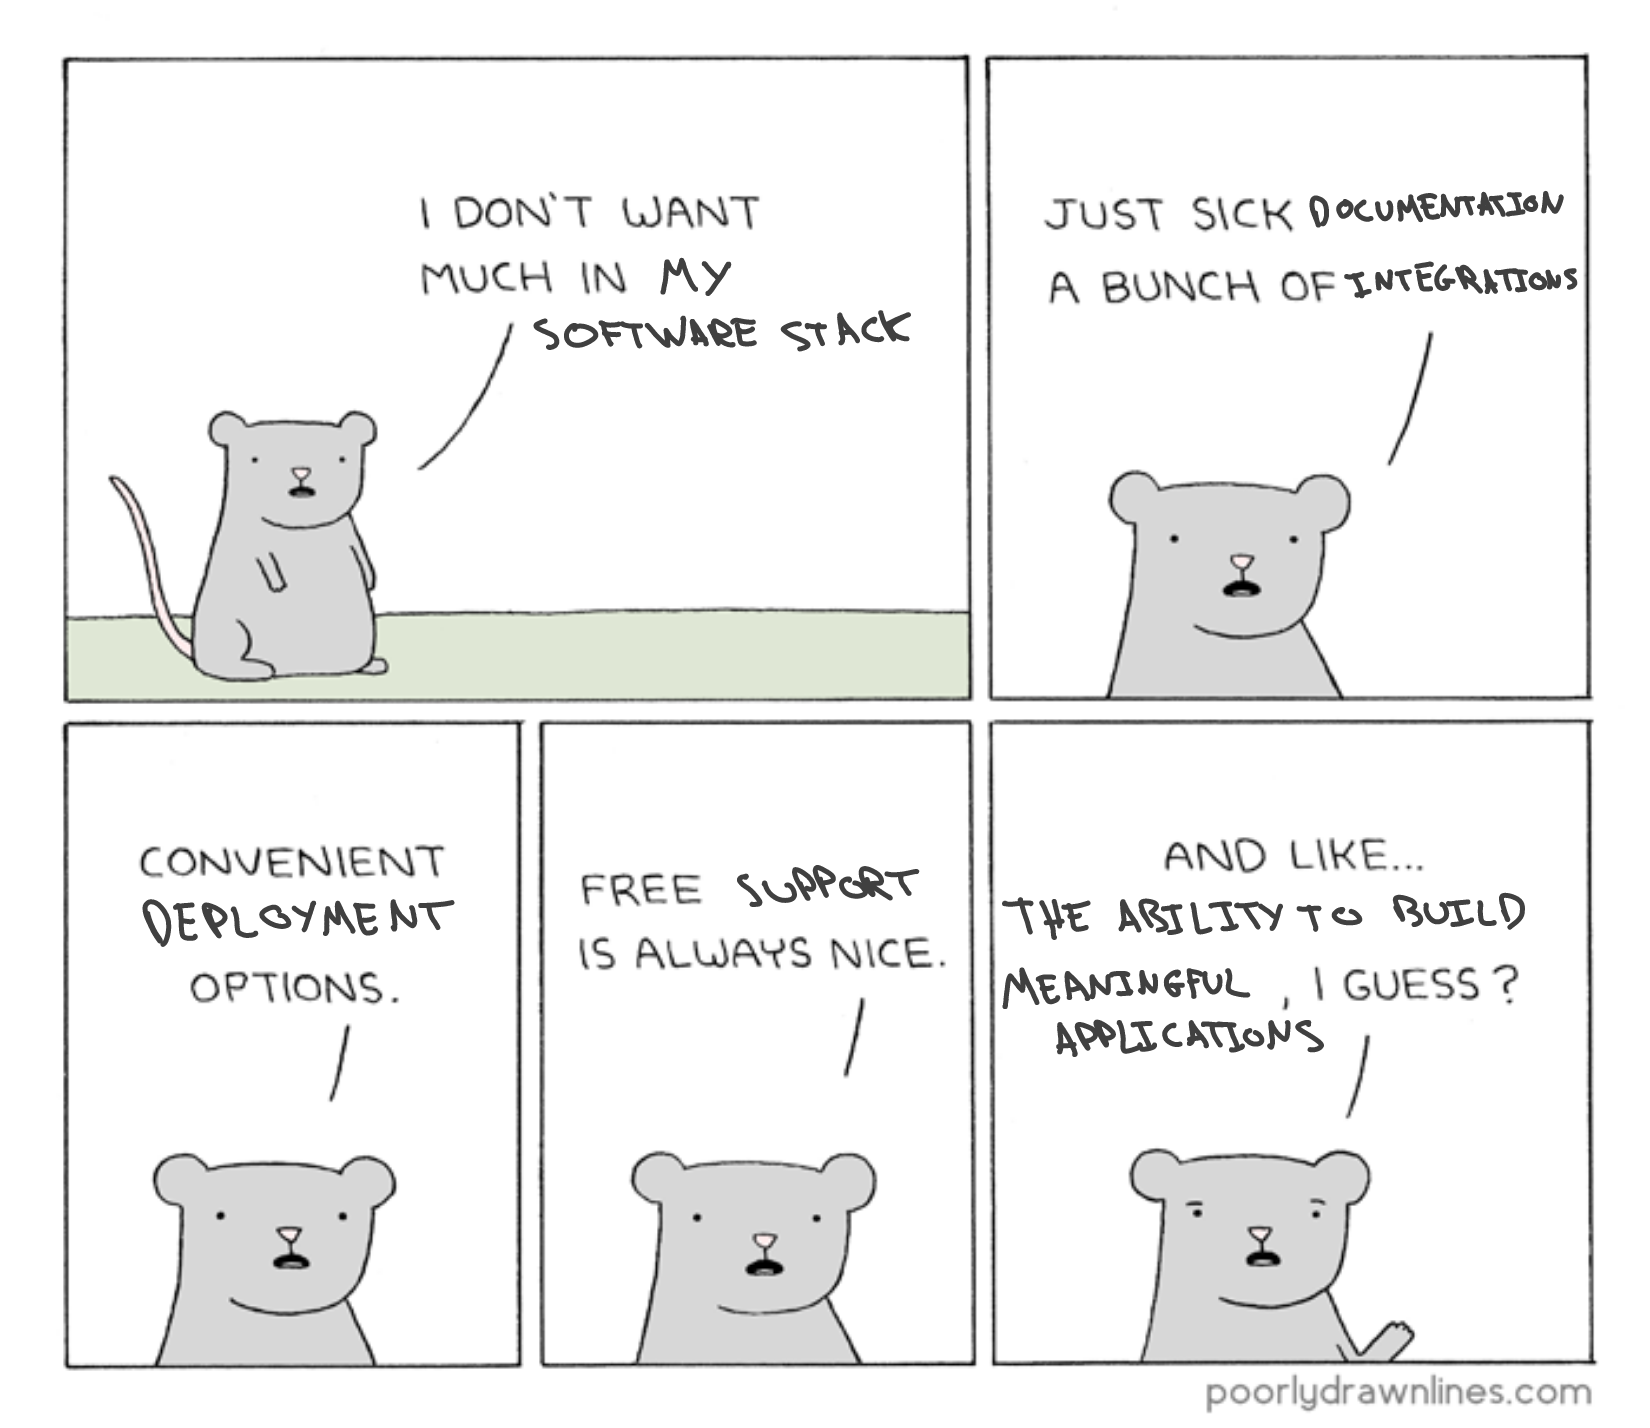 A comic from Poorly Drawn Lines. First Panel: 'I don't want much in my software stack' Second Panel: 'Just sick documentation. A bunch of integrations' Third Panel: 'Convenient deployment options.' Fourth Panel: 'Free support is always nice.' Fifth Panel: 'And like... the ability to build meaningful applications, I guess?'